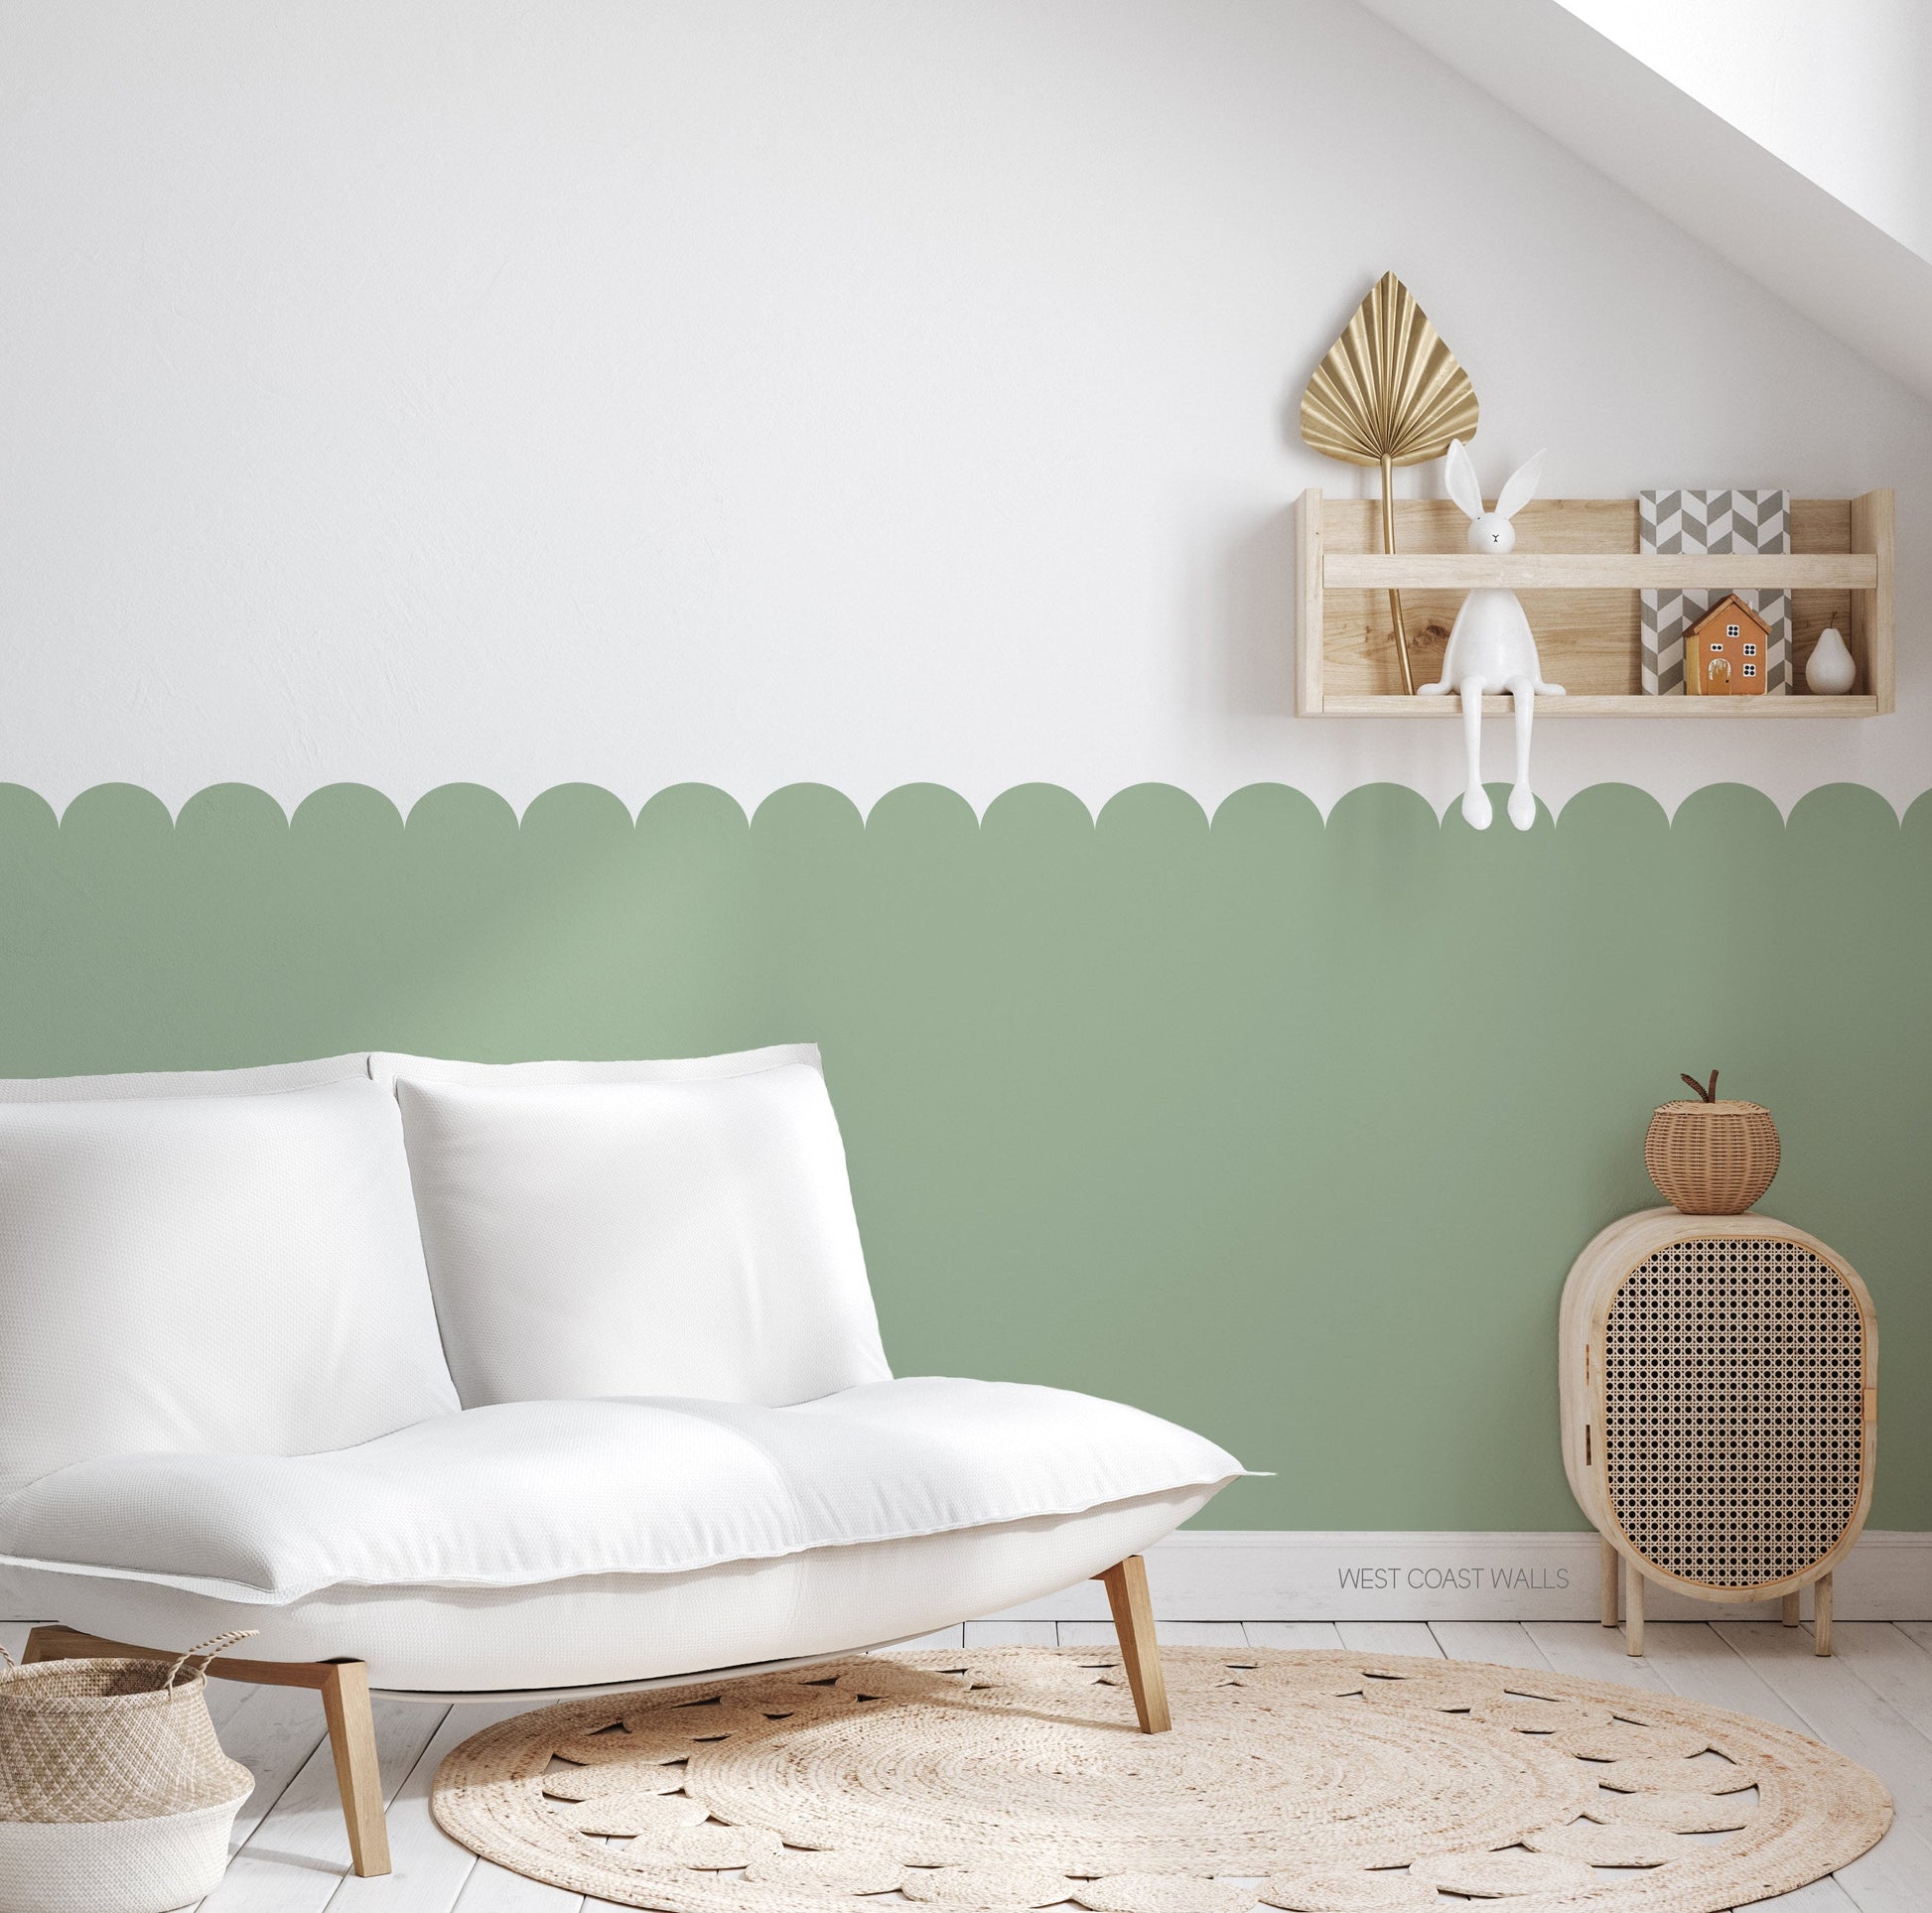 Scalloped Wall Decal